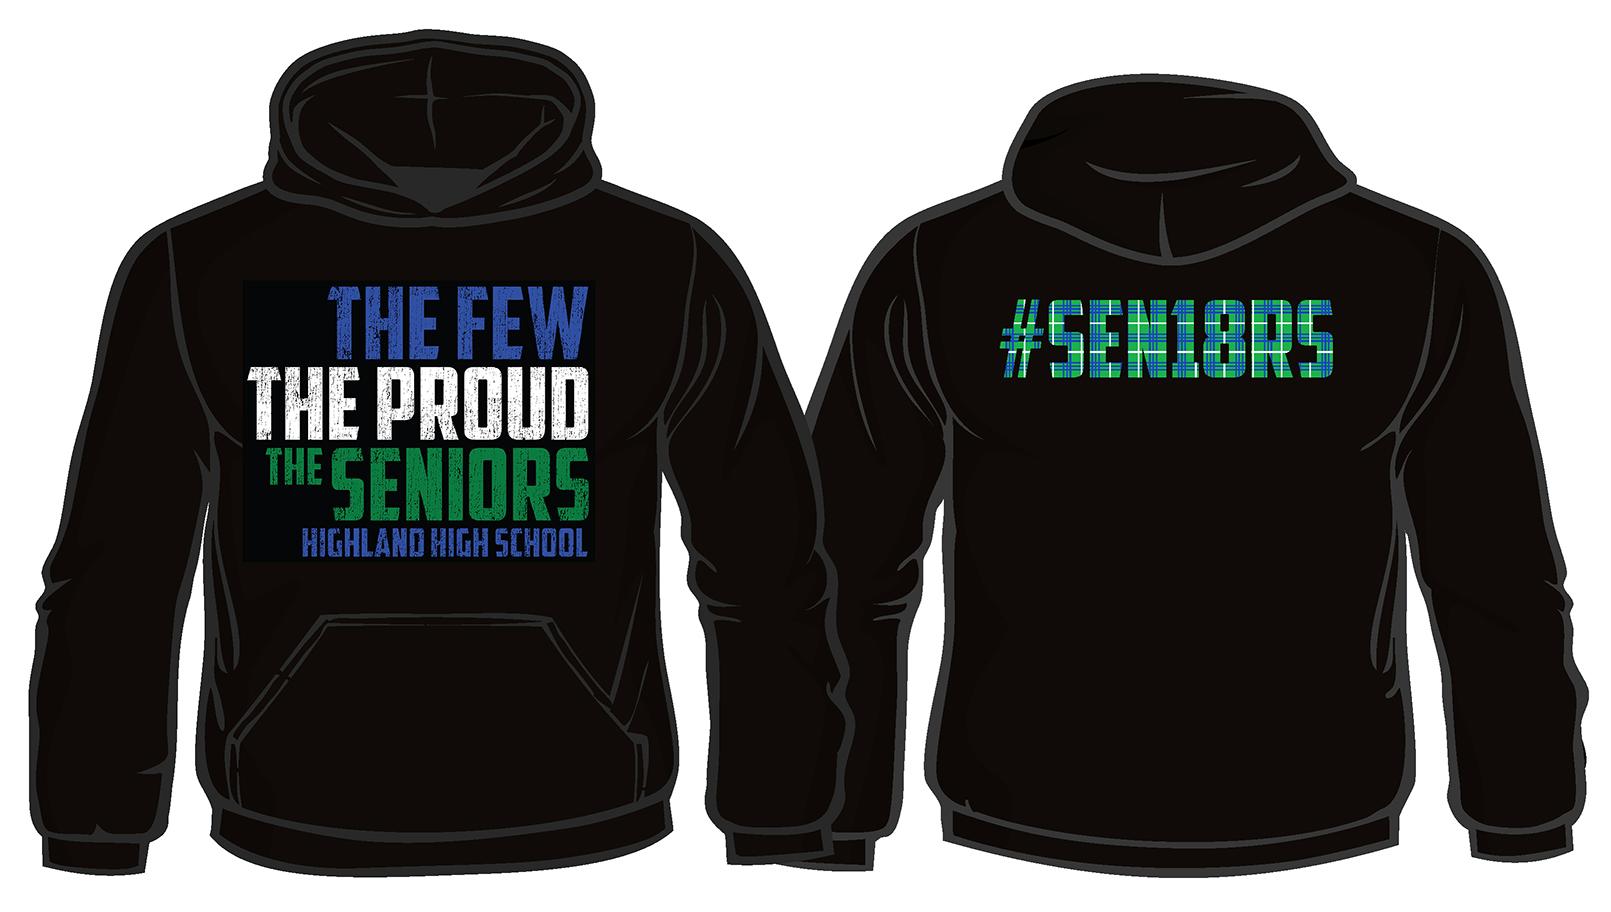 The front and back of the Seniors Sweatshirt.